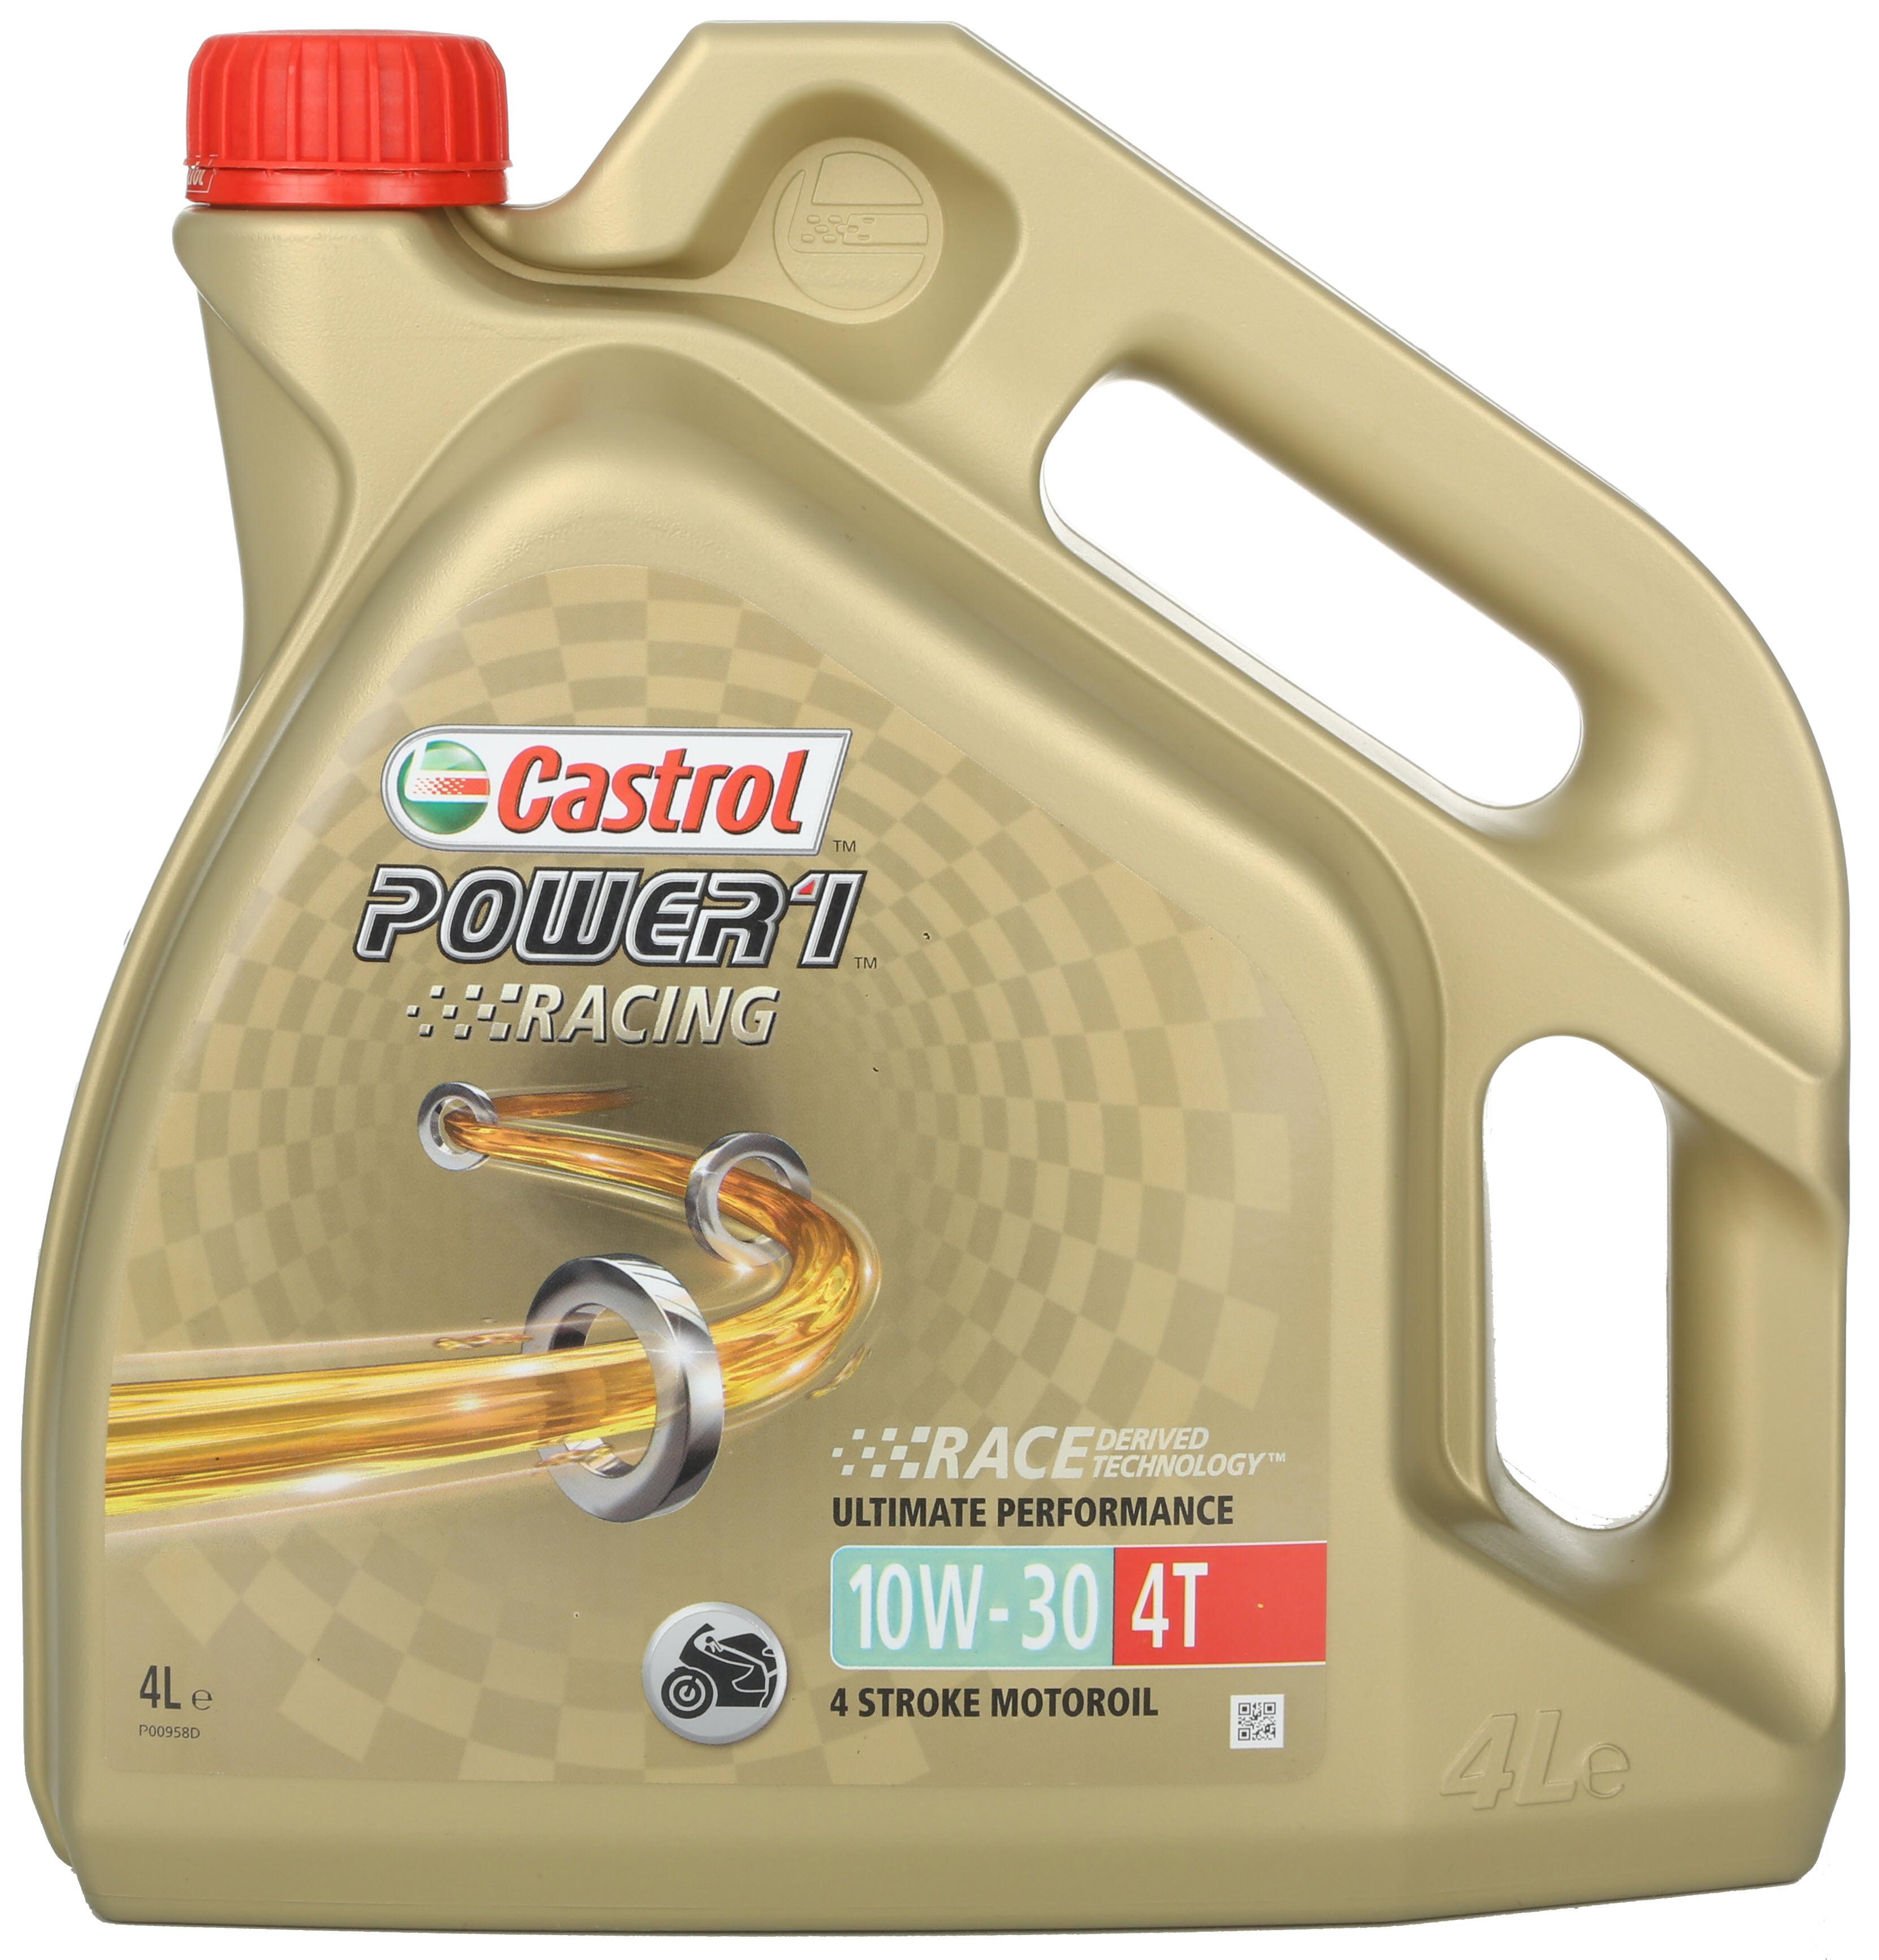 Castrol Power 1 Racing 4T 10W/30 Motorcycle Engine Oil - 4Ltr